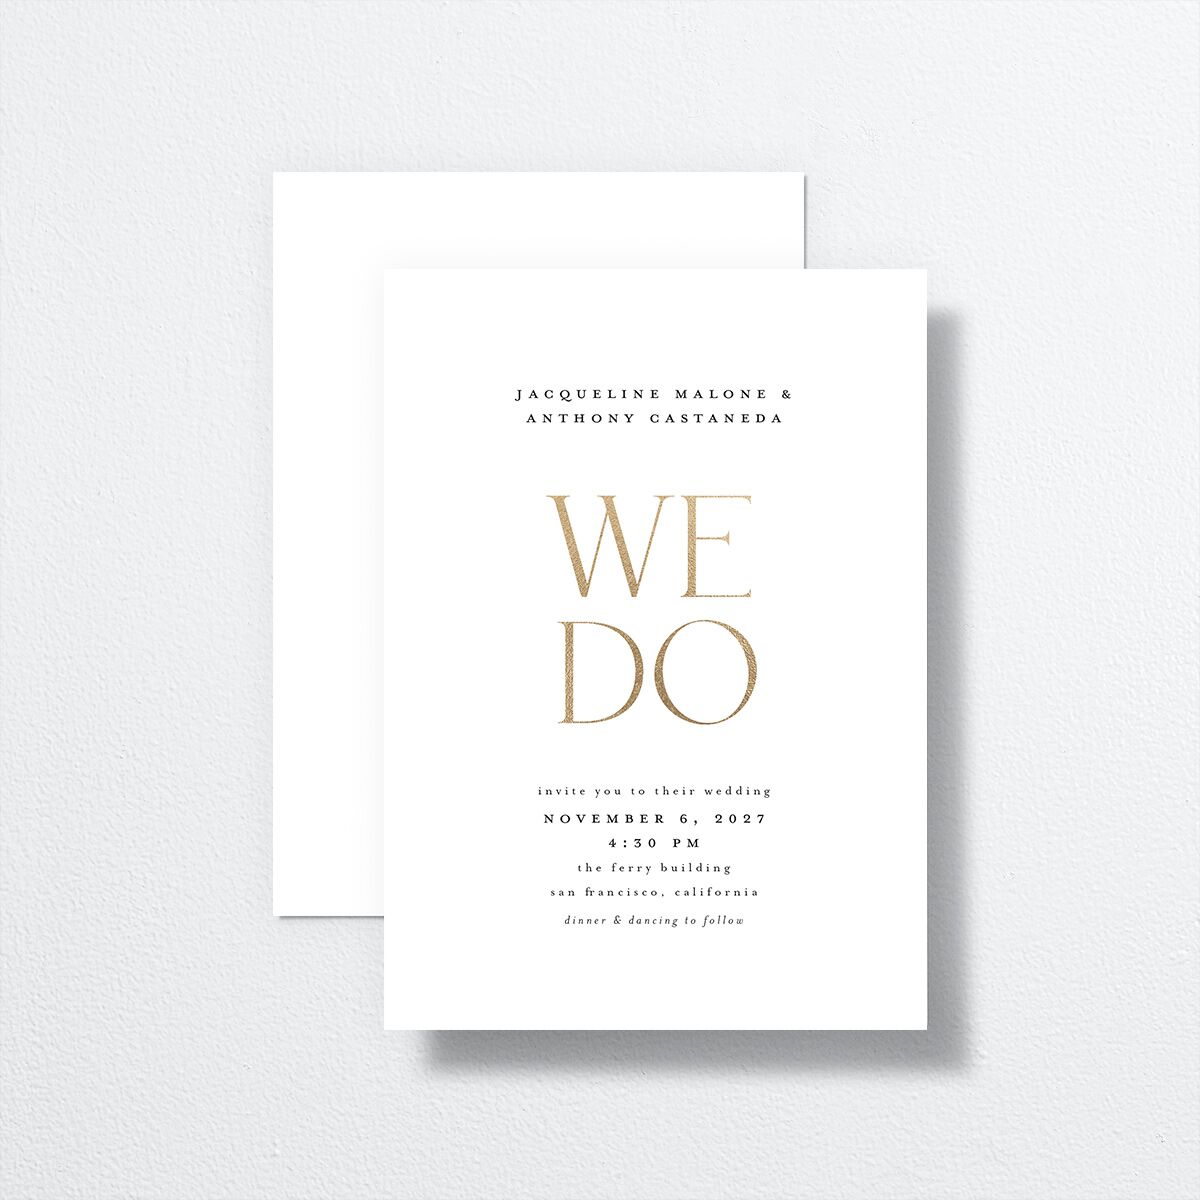 Elegant Nuptials Wedding Invitations front-and-back in white